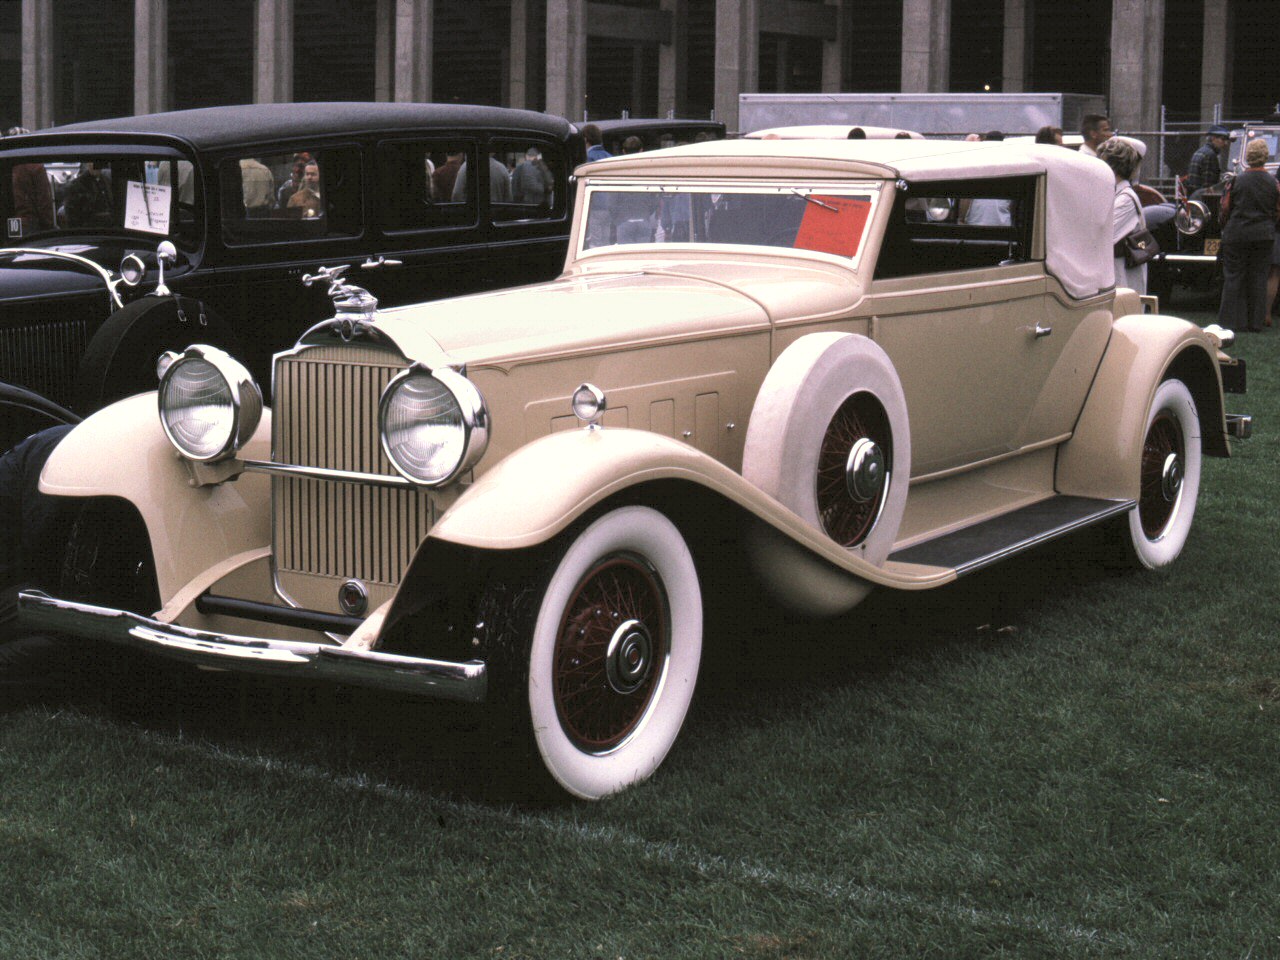 1930 Packard Convertible Coupe Tan fvl 35mm Hershey, PA, 1970